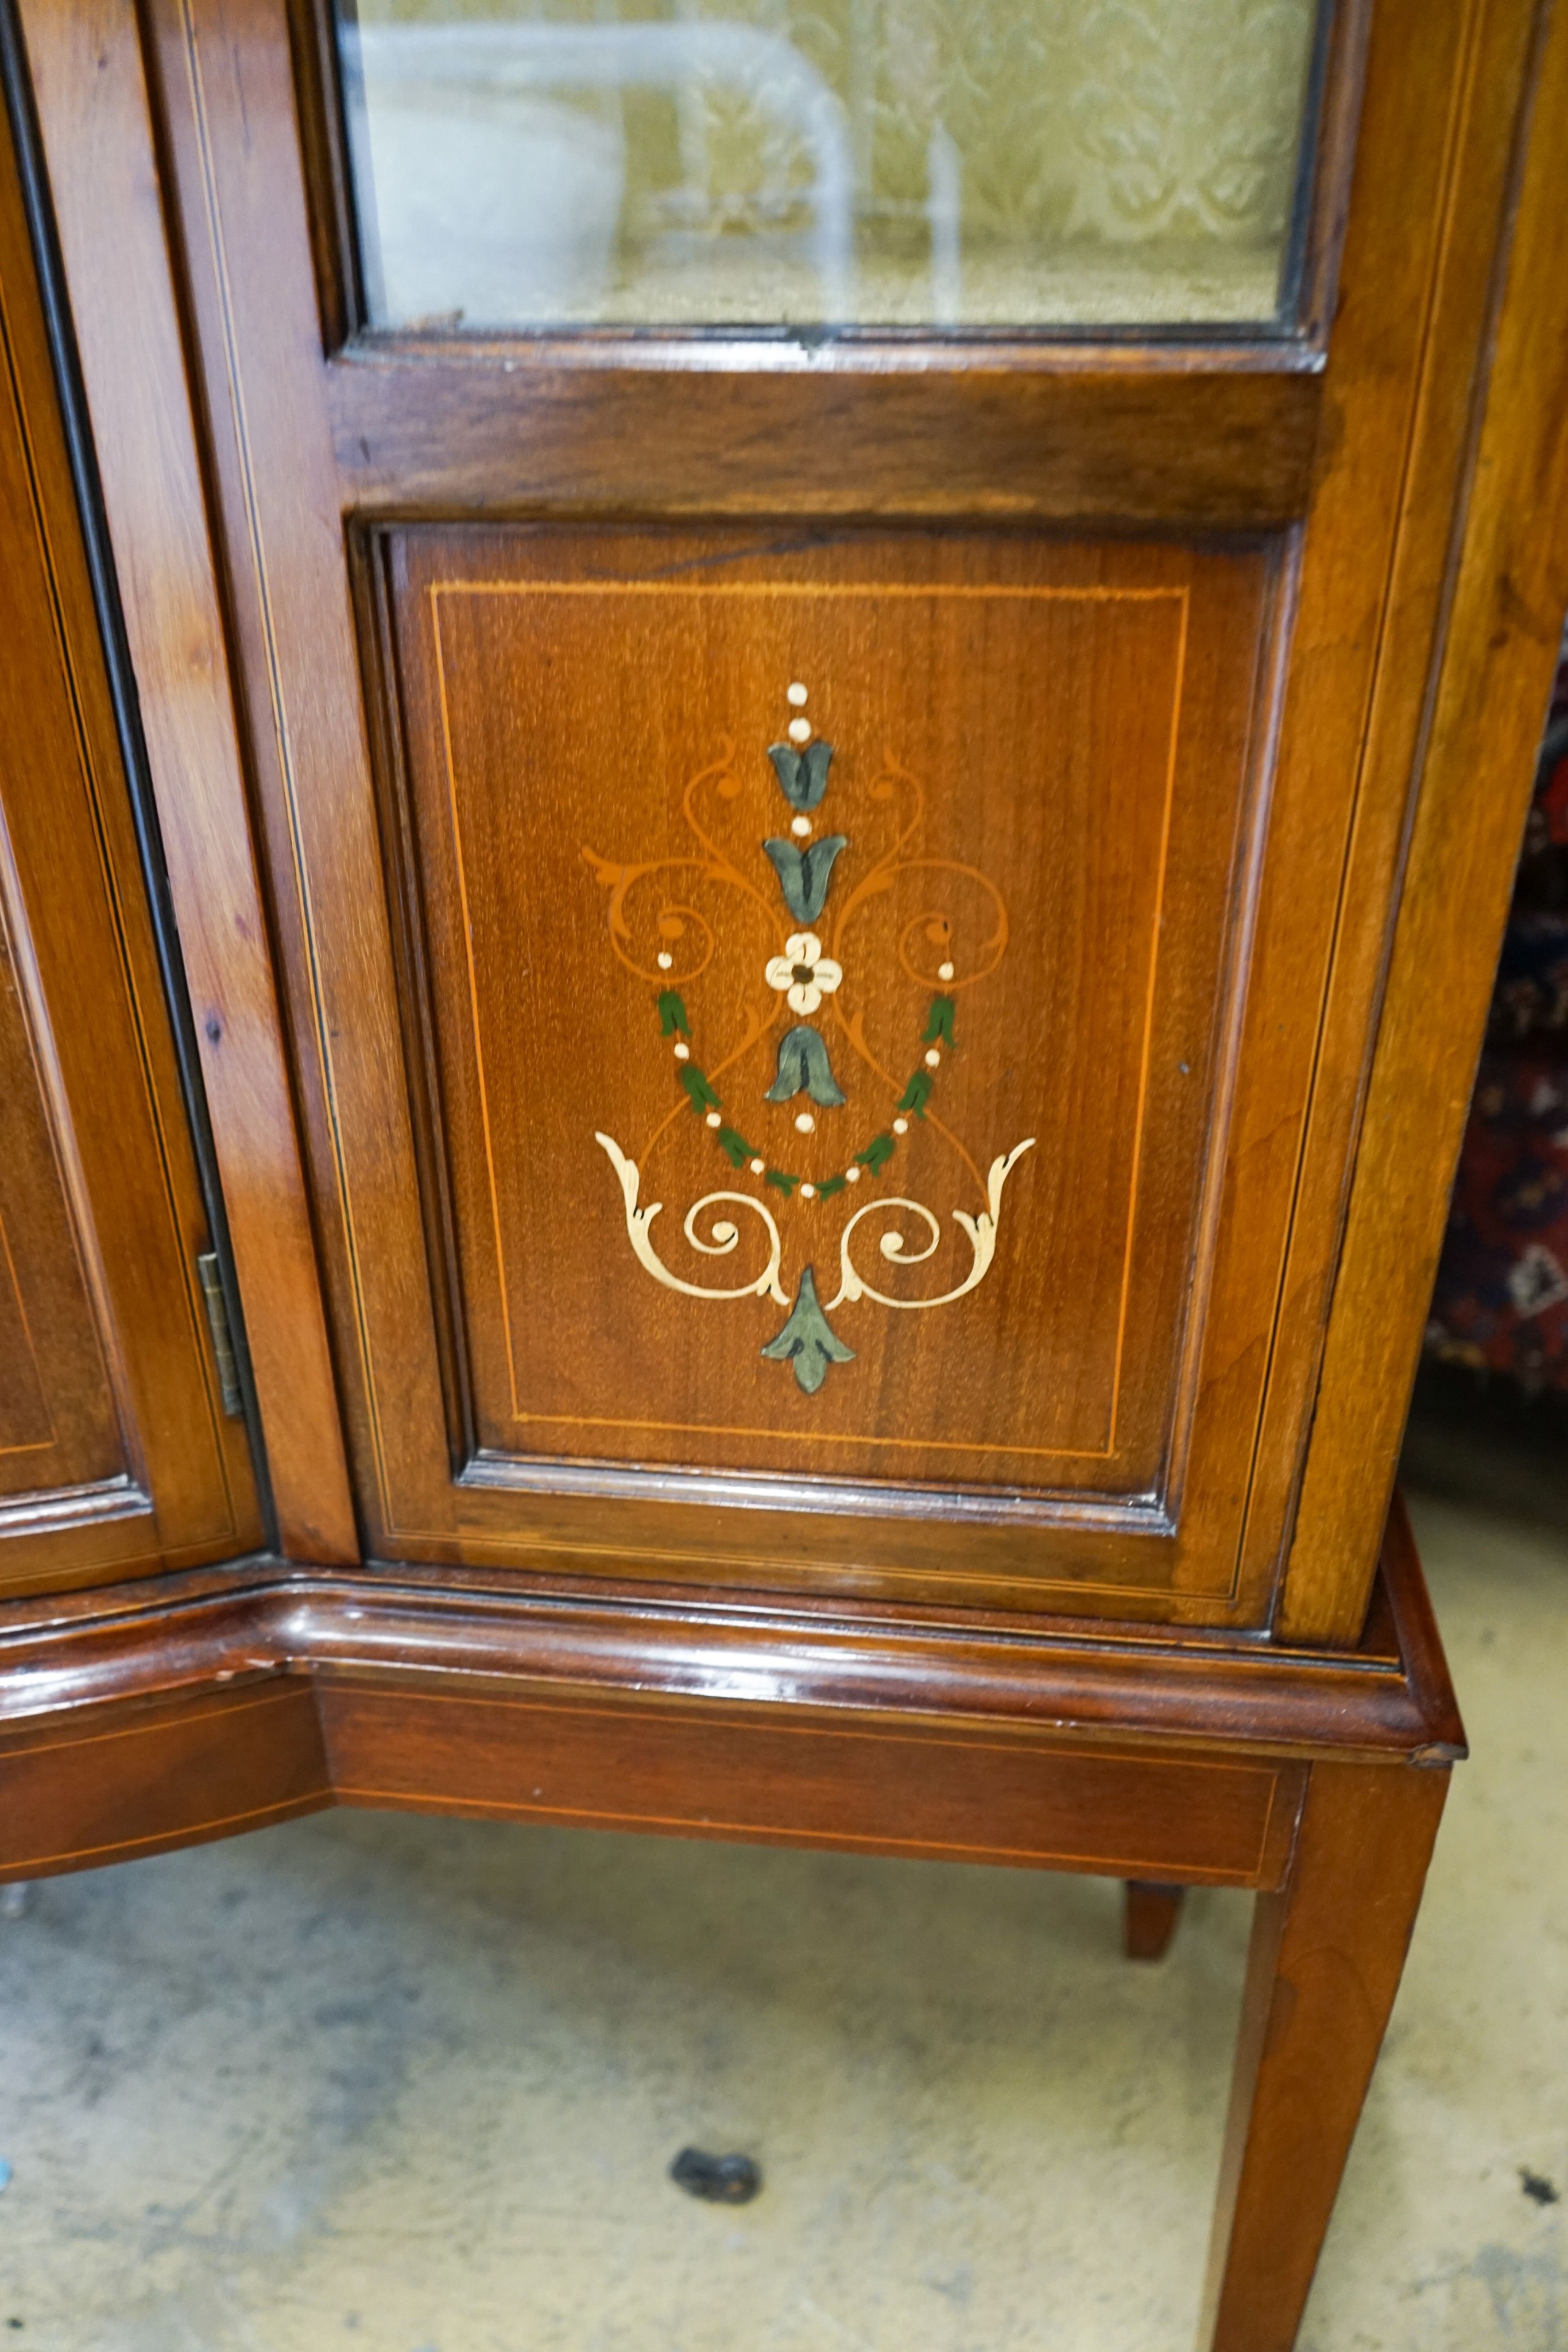 An Edwardian inlaid mahogany bow front display cabinet, width 115cm, depth 43cm, height 178cm